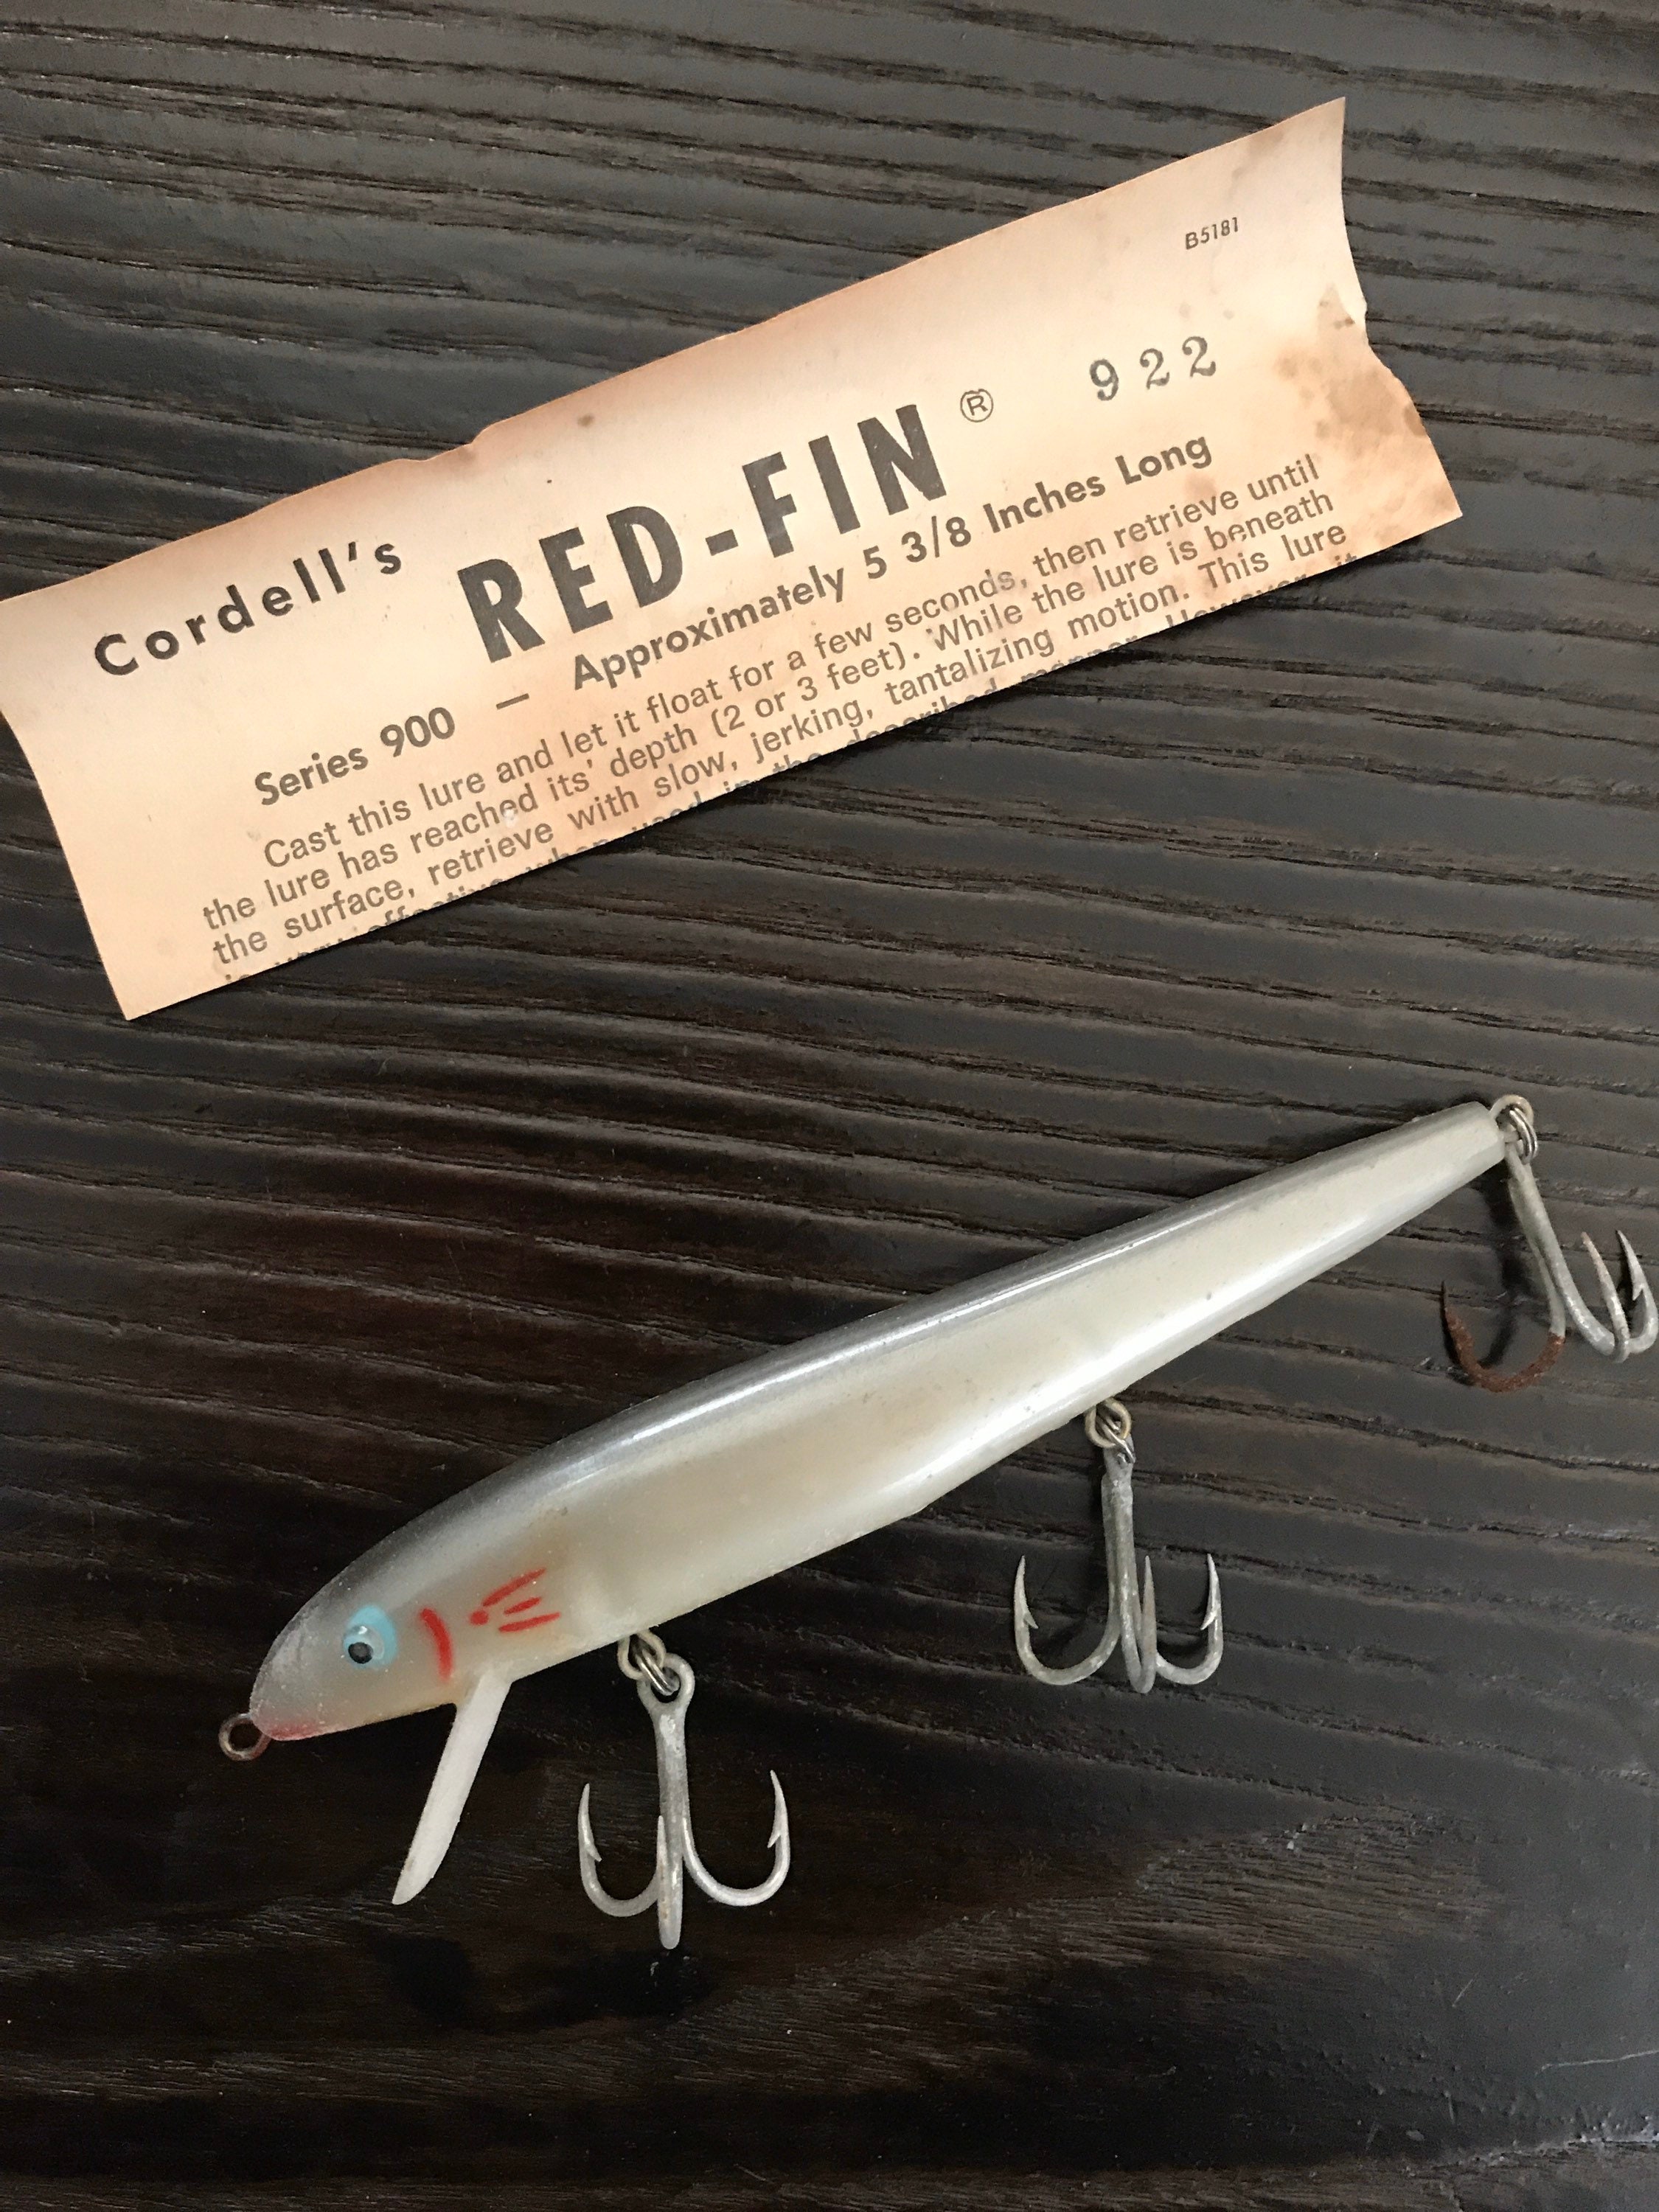 Vintage Cordell's Red-fin Series 900 Fishing Lure 